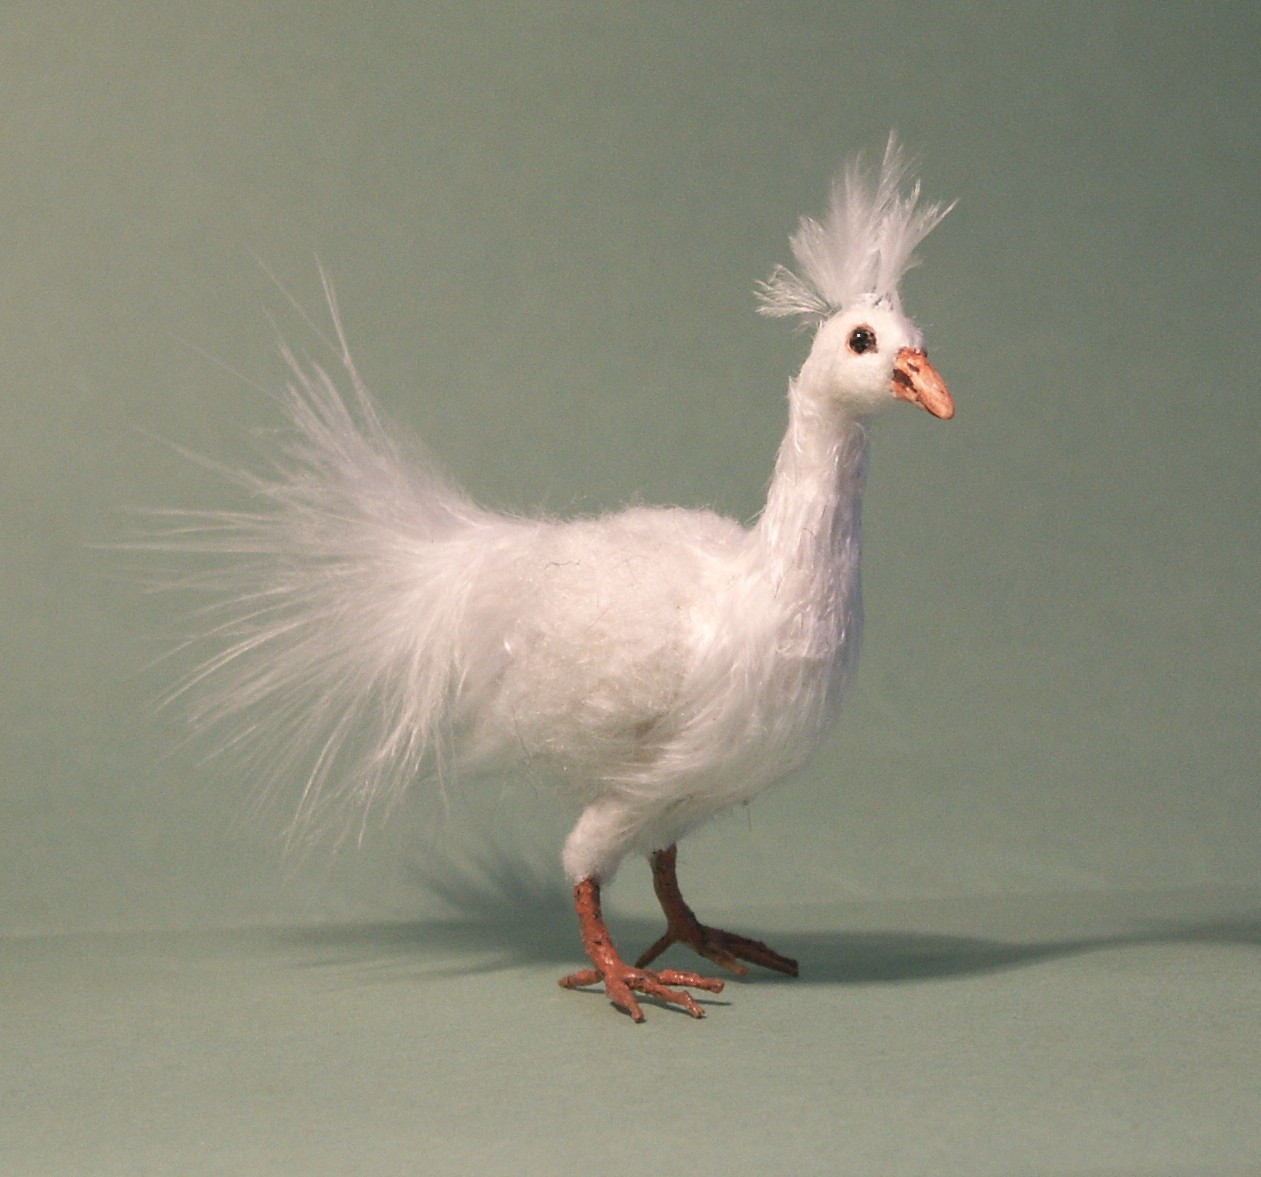 Dolls house feathered peahen (peacock)